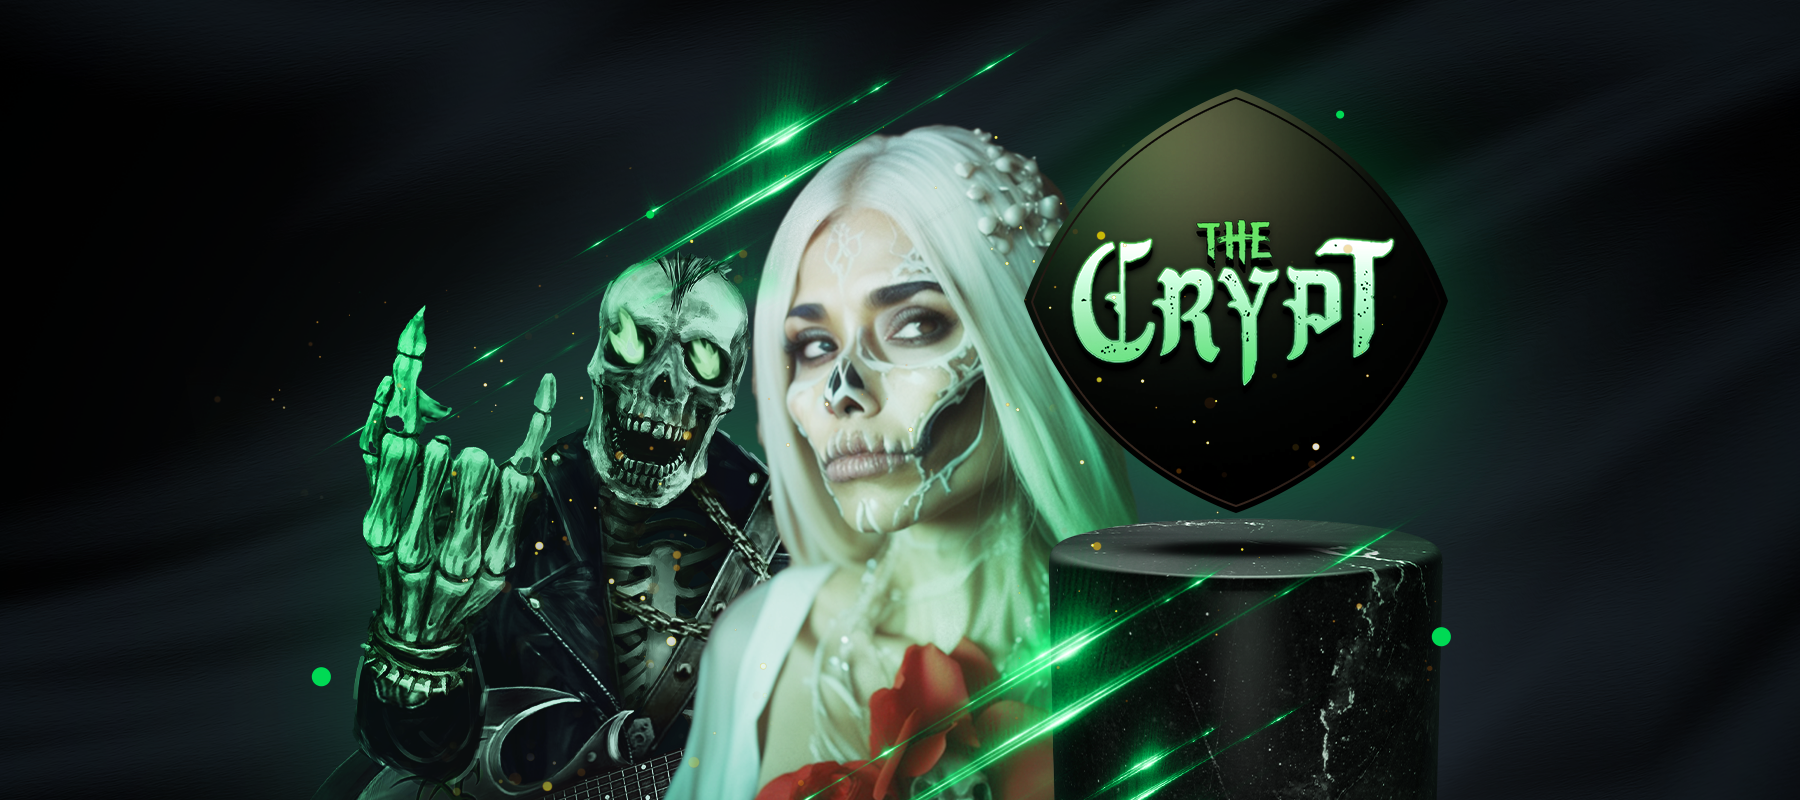 Our Game Of The Week - The Crypt